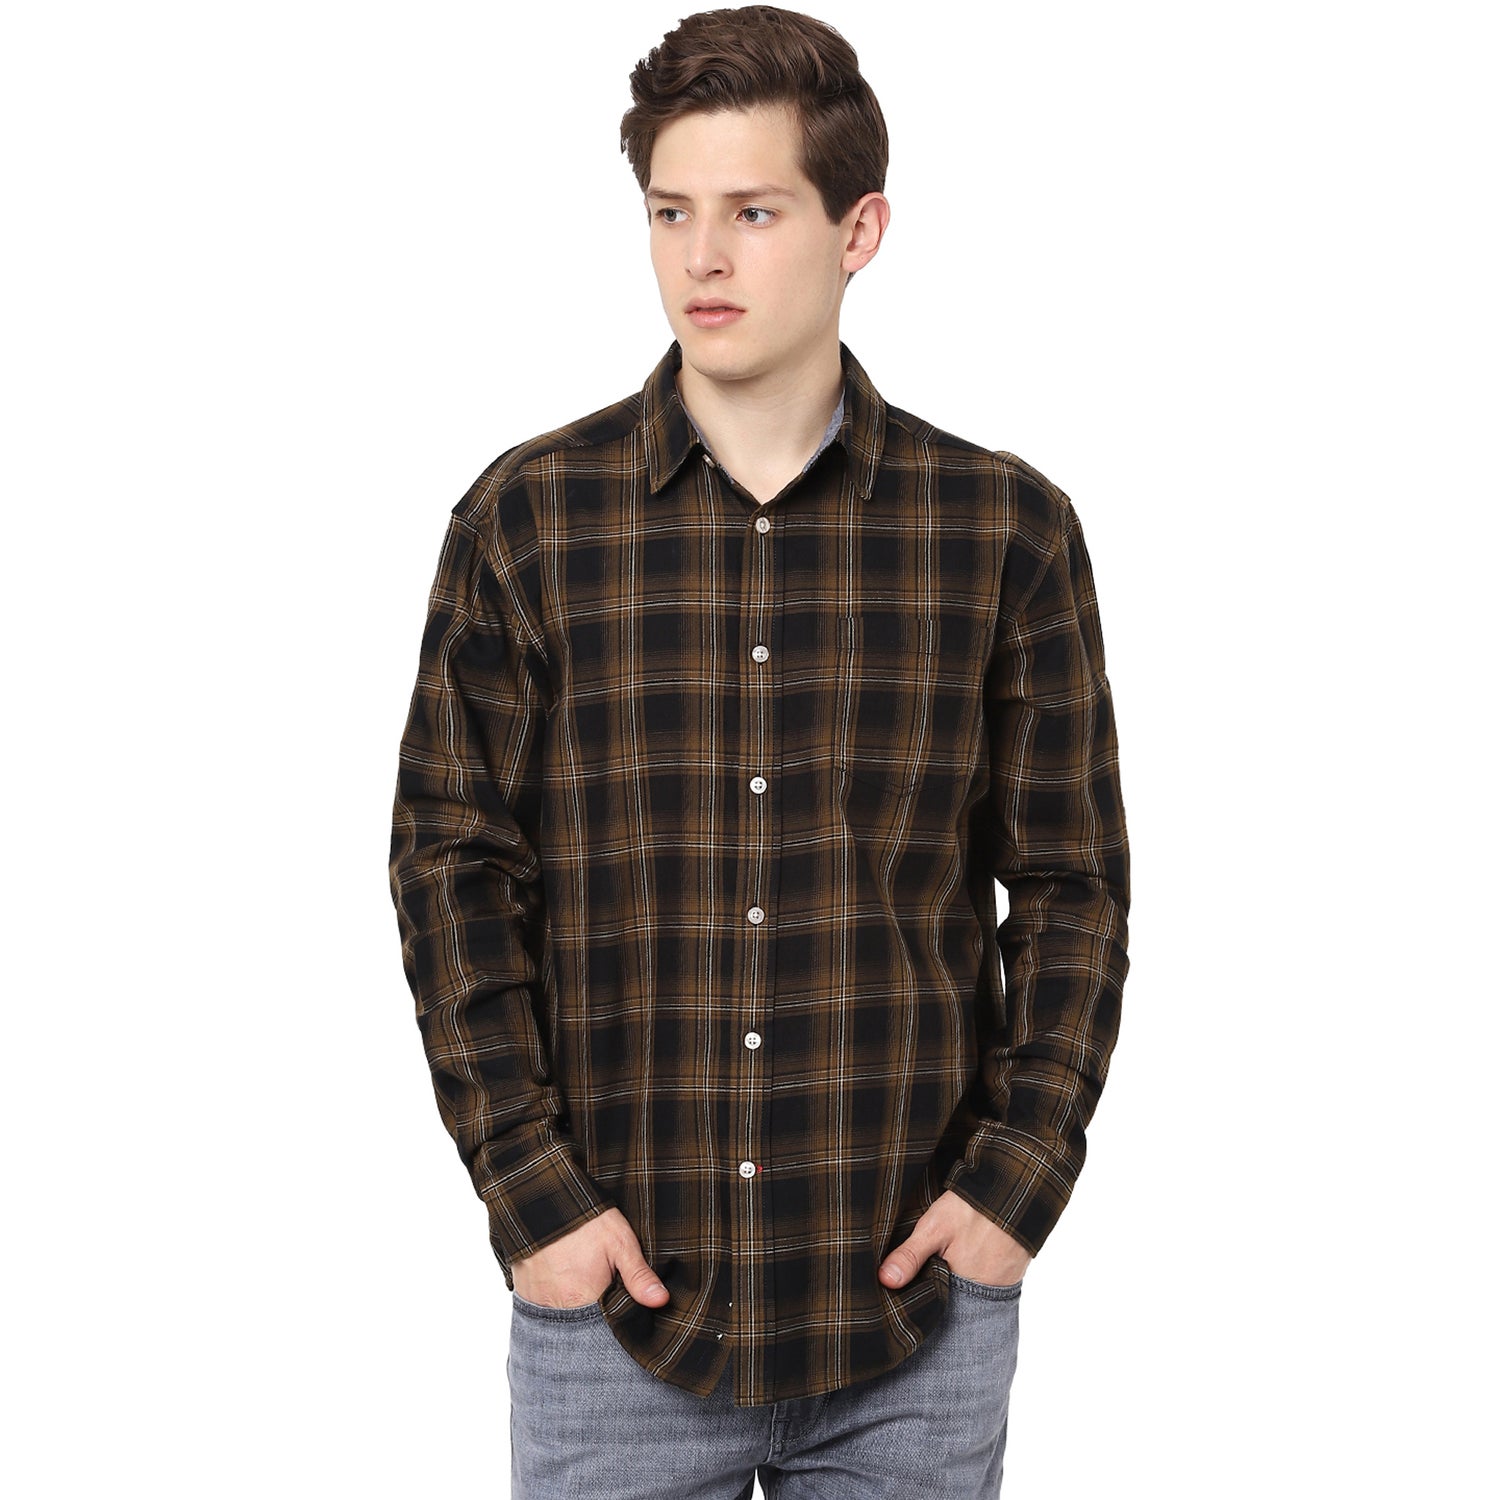 Brown and Black Checked Cotton Casual Shirt (VACHECK3)